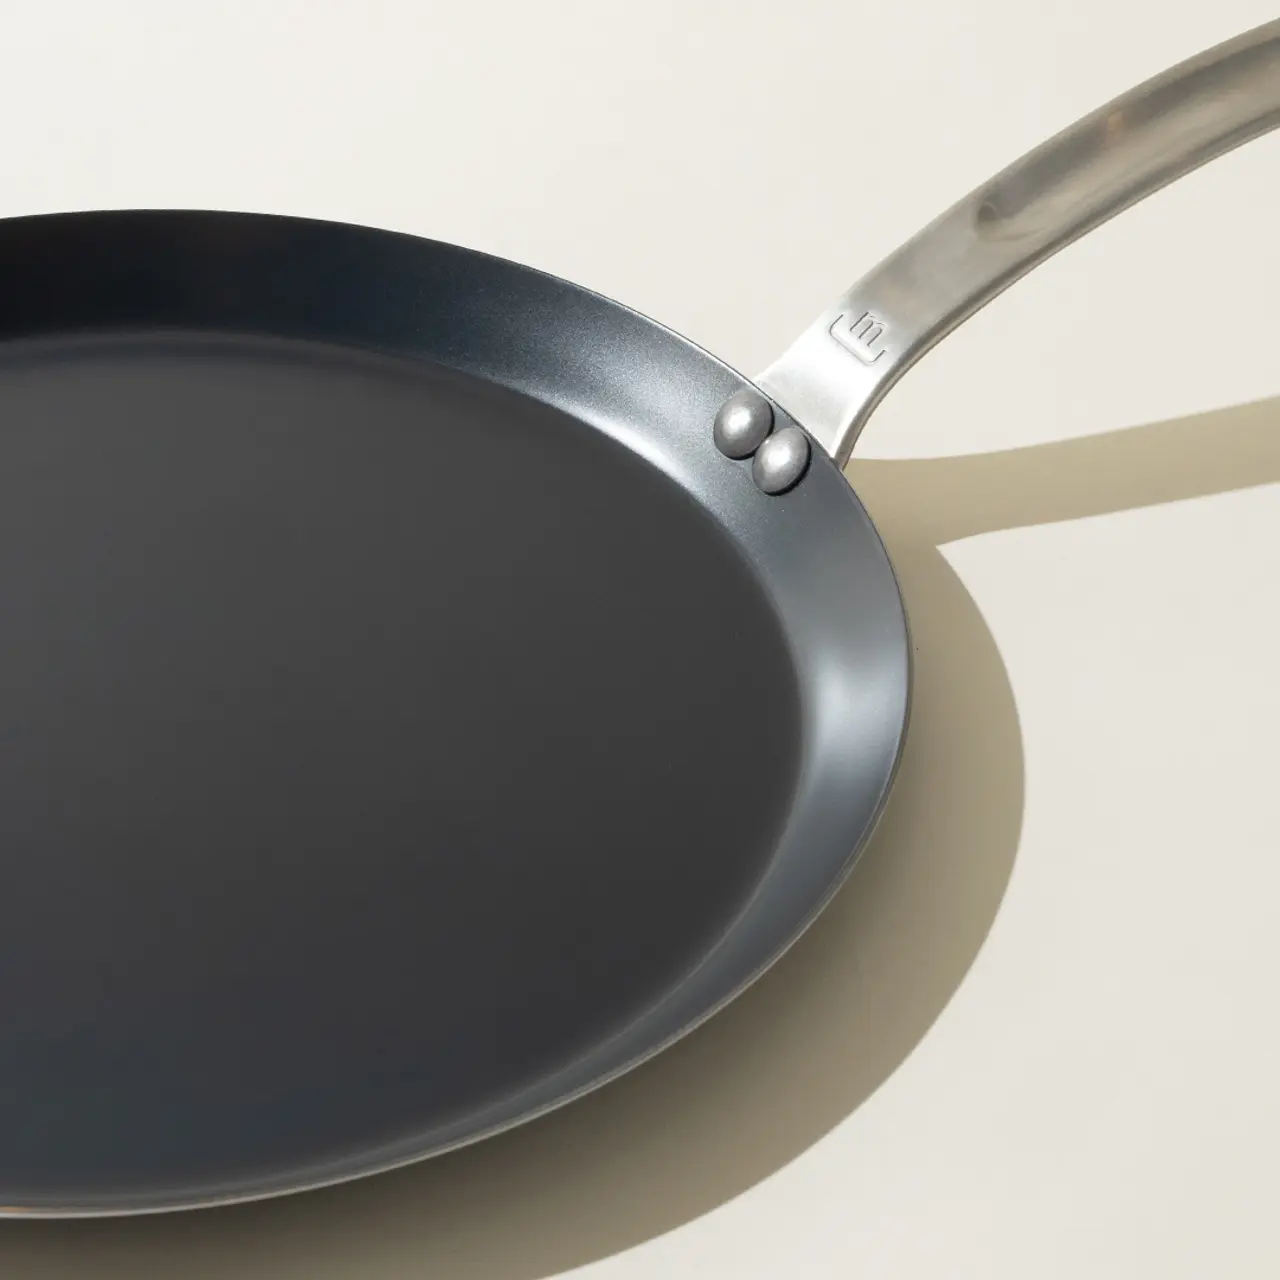 A new non-stick frying pan with a stainless steel handle on a light background, casting a soft shadow.